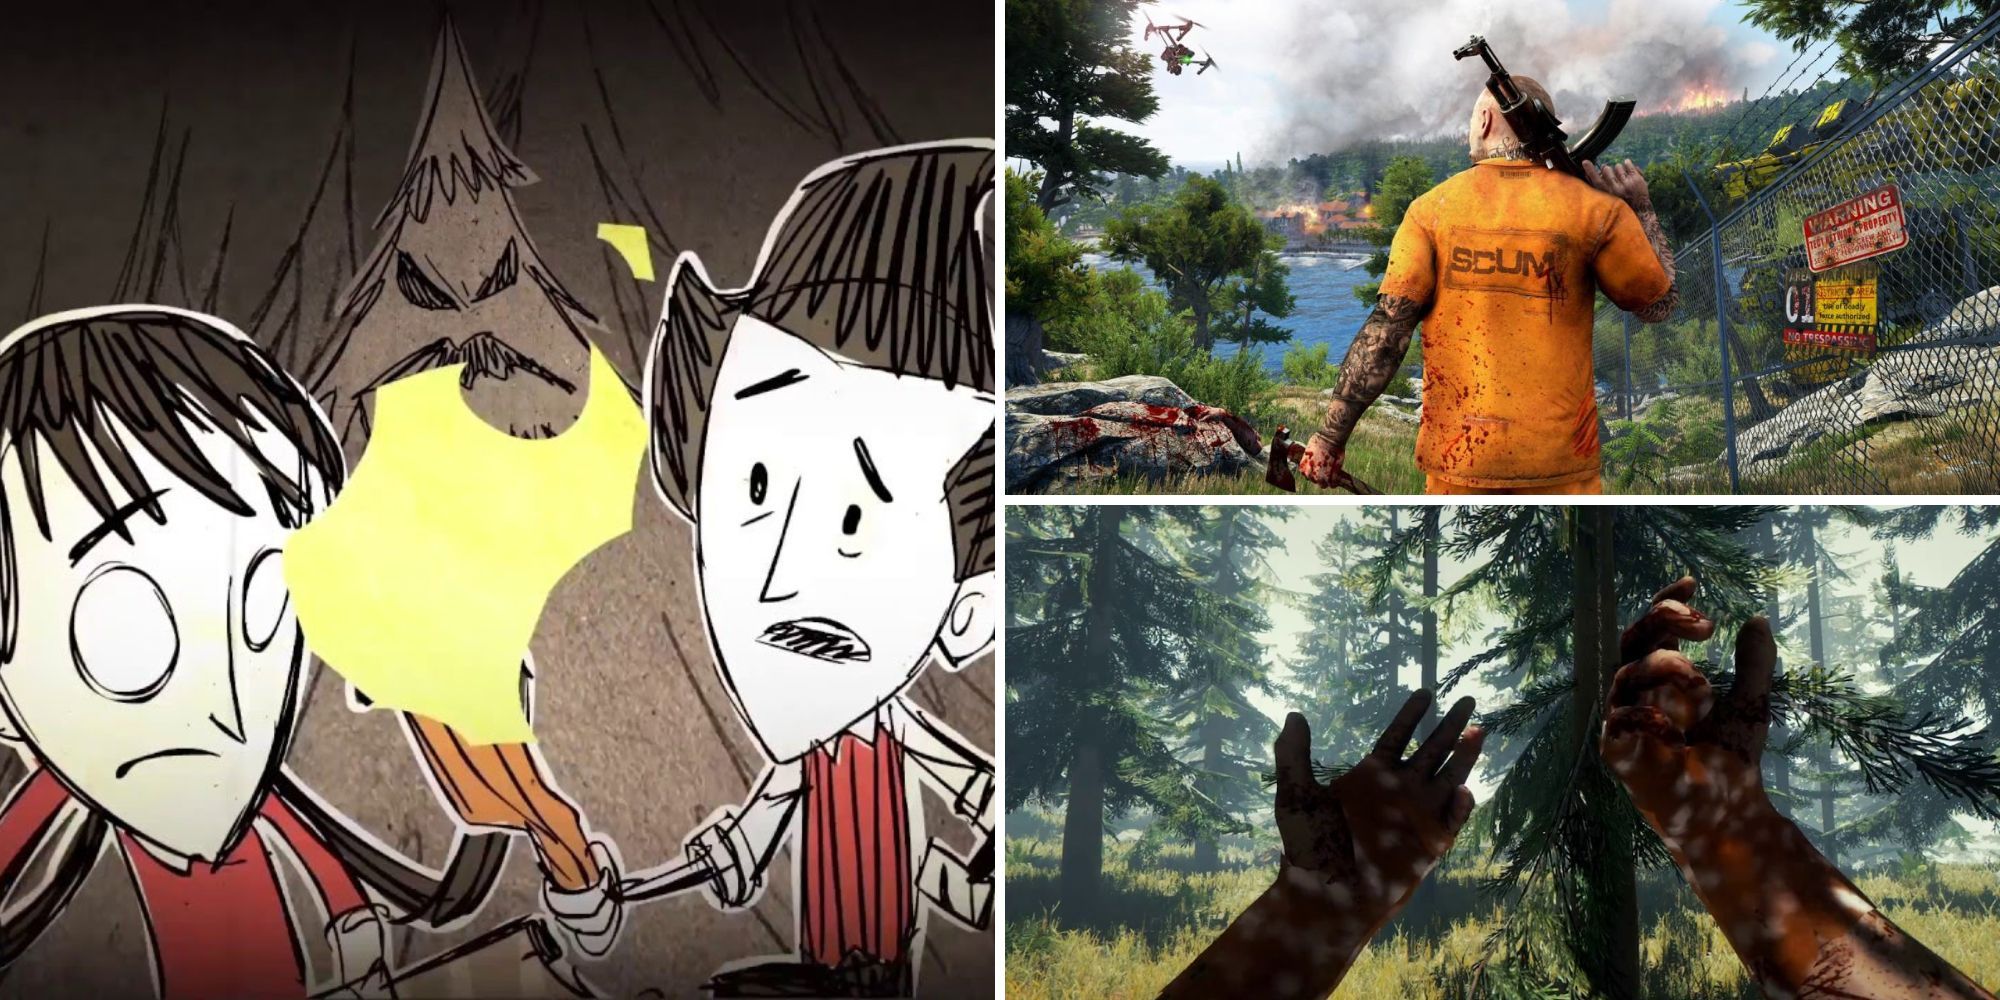 Split image Don't Starve Together characters holding torch, Scum character with weapon over shoulder, The Forest characters with arms raised.